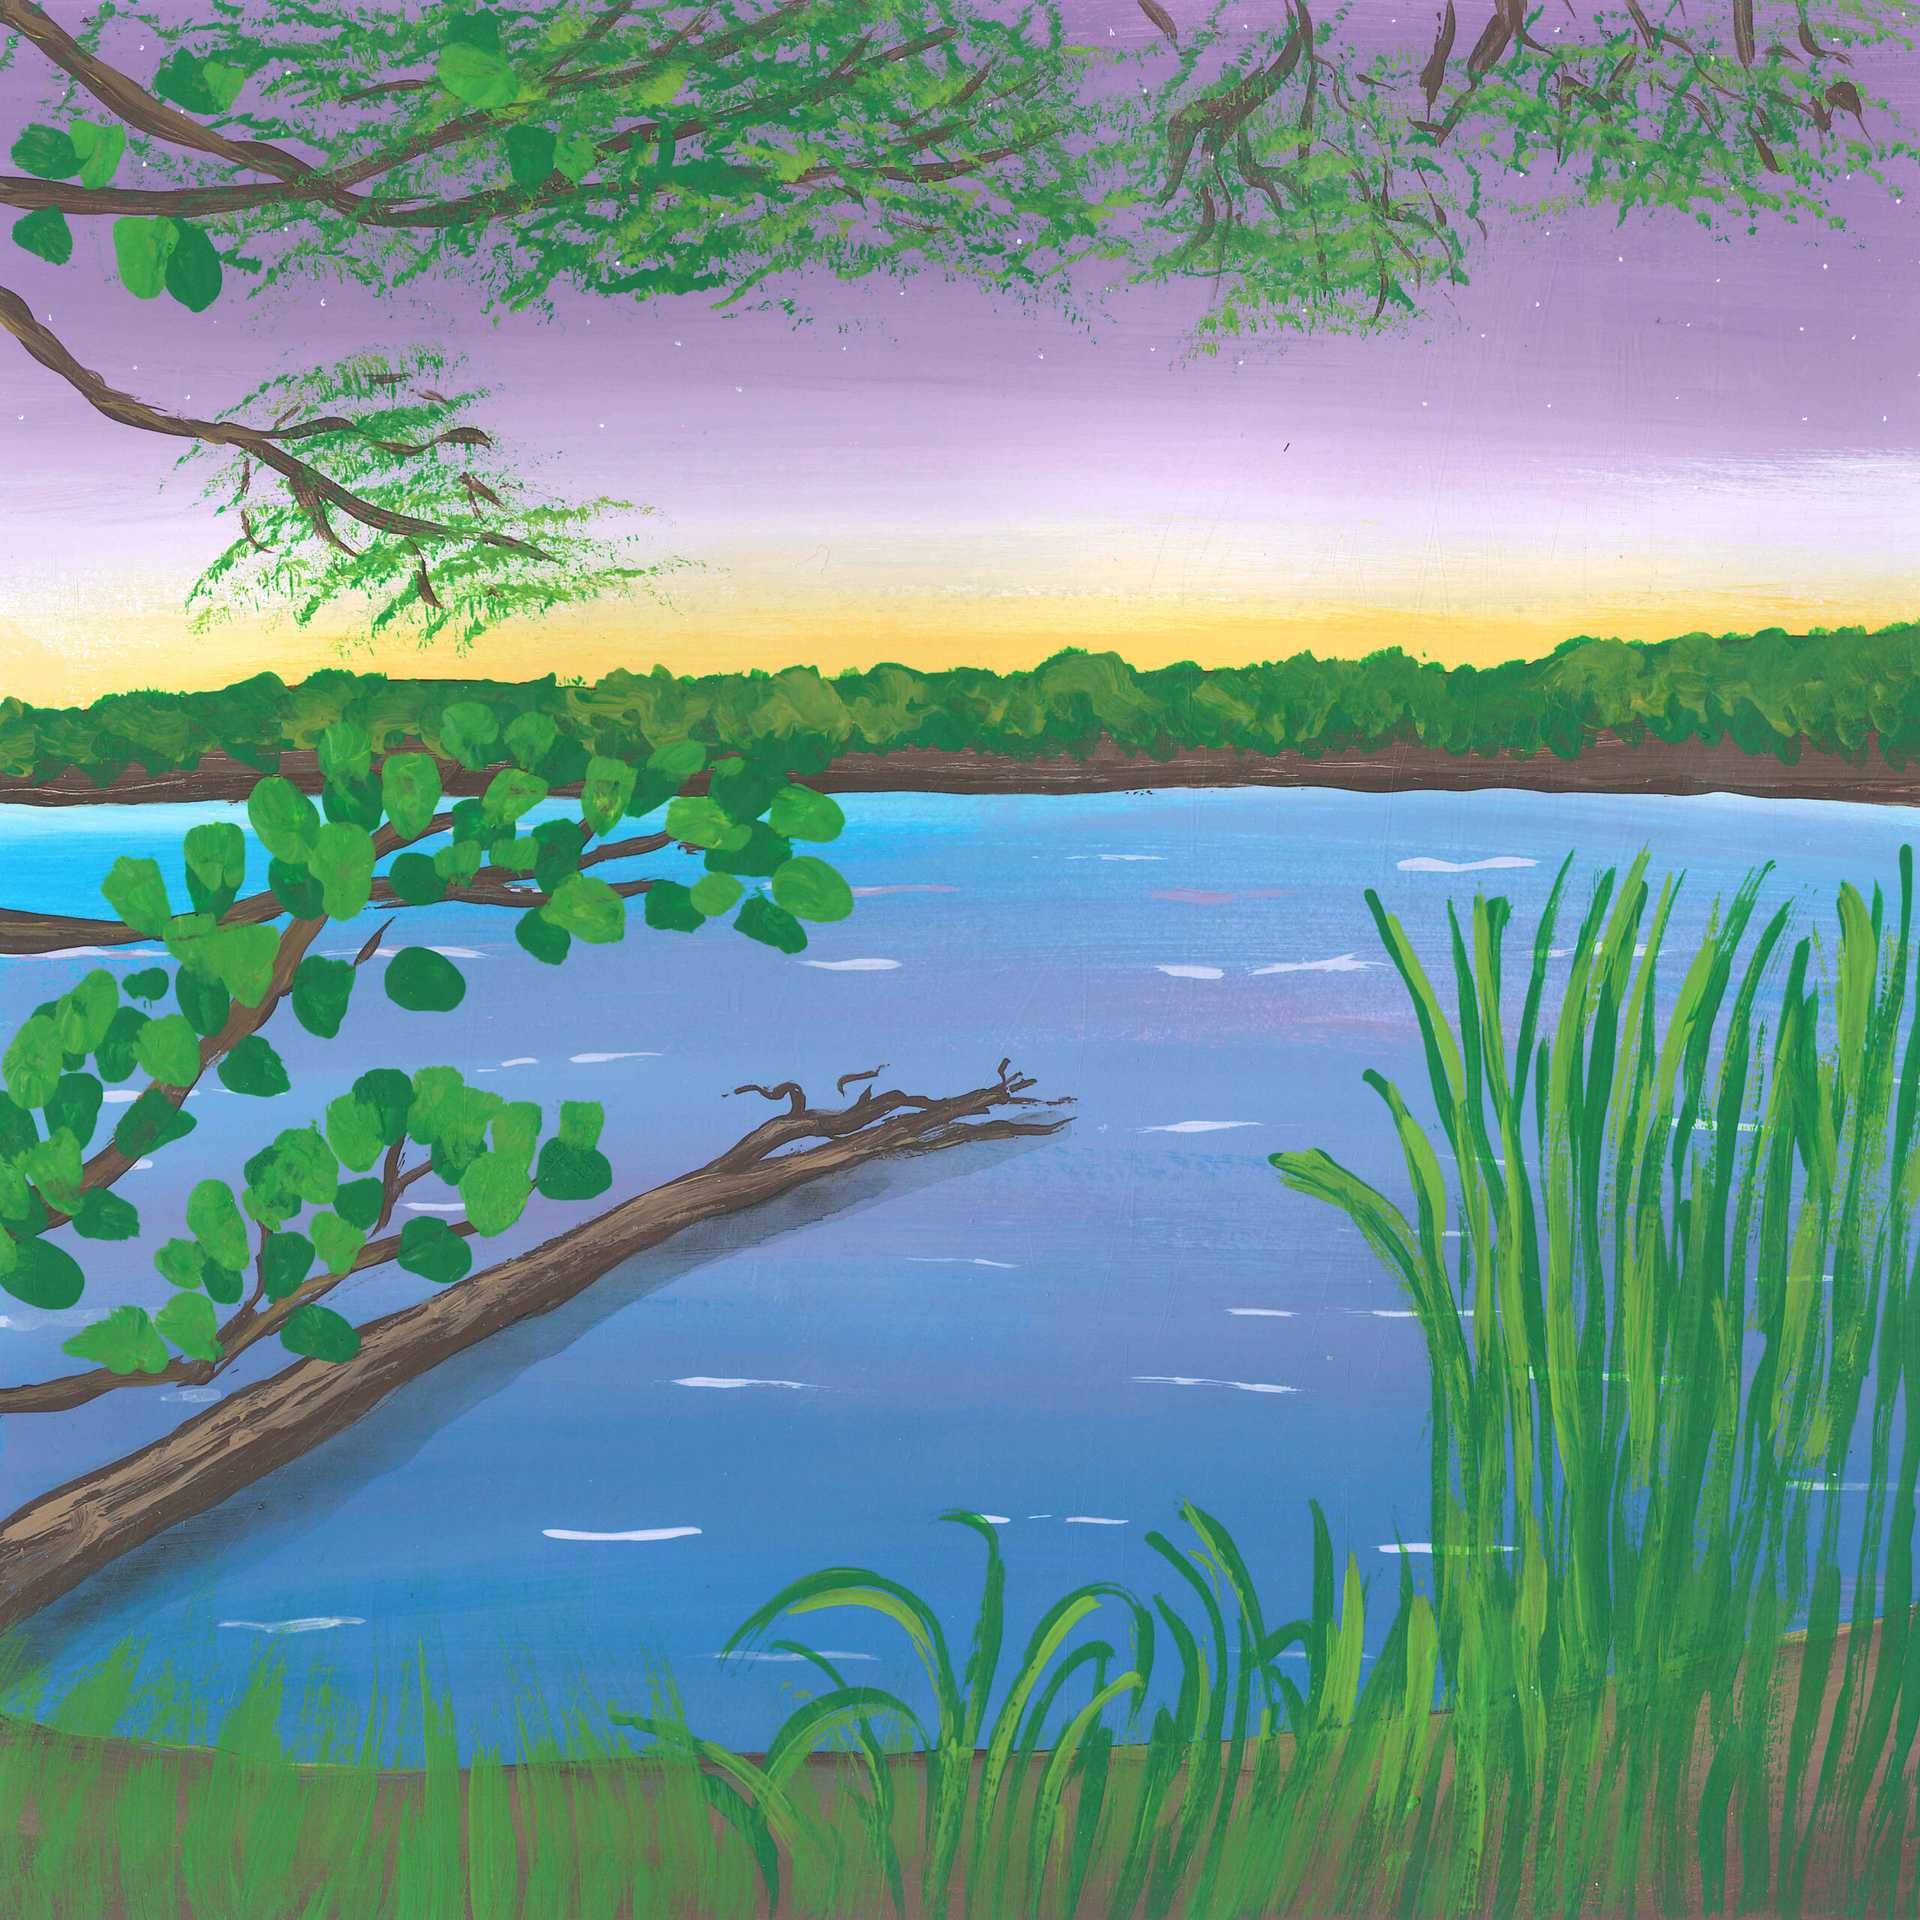 Dawn in a Swedish Island - nature landscape painting - earth.fm